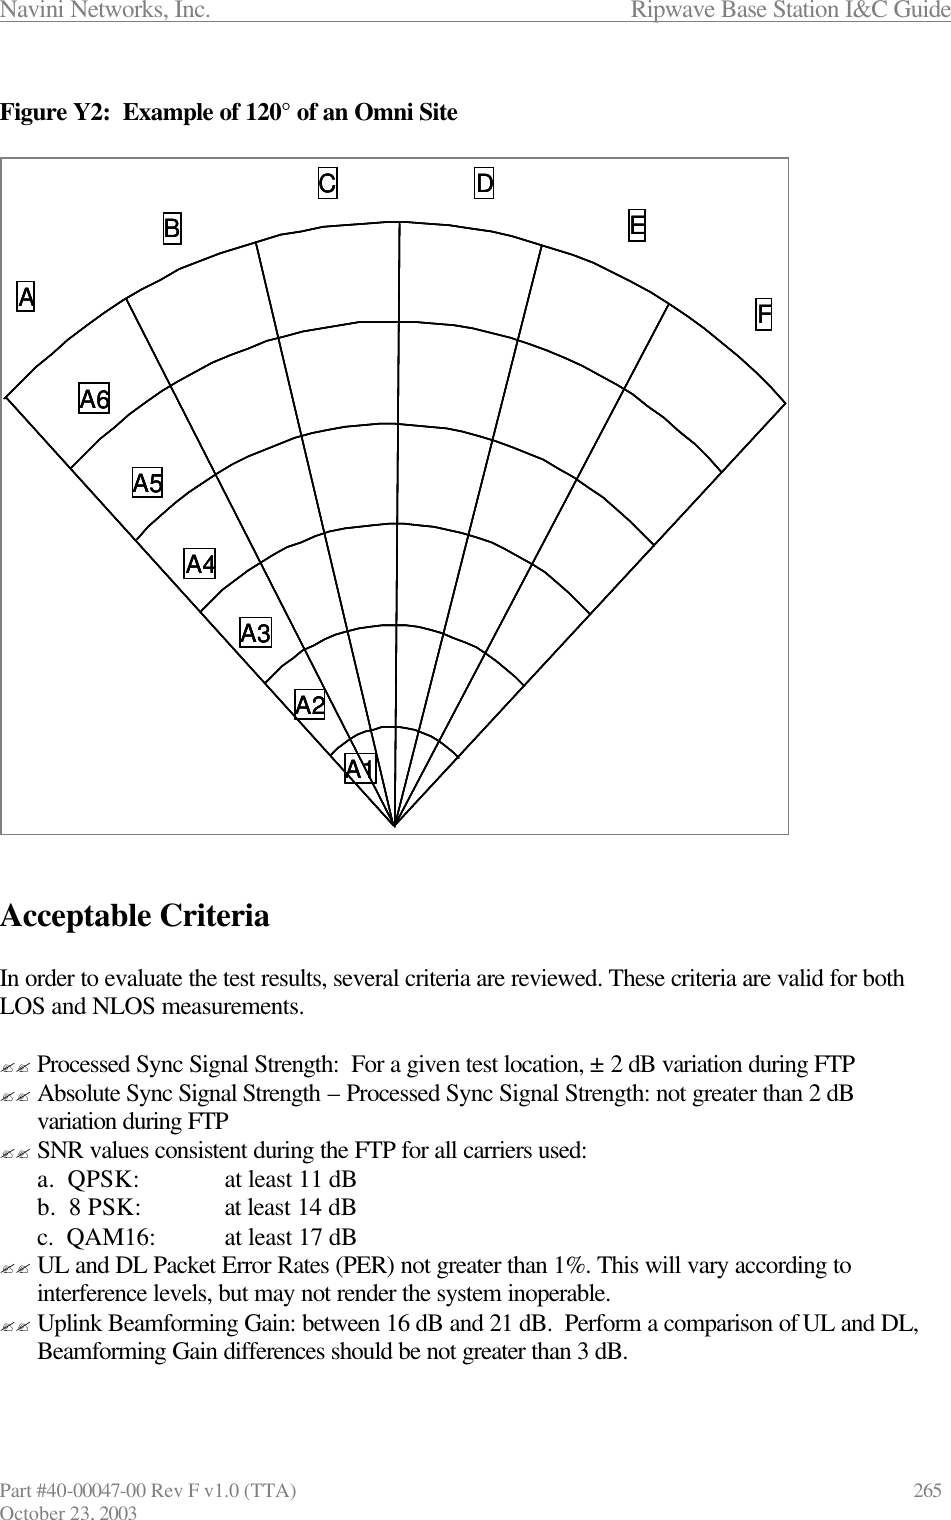 Navini Networks, Inc.                      Ripwave Base Station I&amp;C Guide Part #40-00047-00 Rev F v1.0 (TTA)            265 October 23, 2003  Figure Y2:  Example of 120° of an Omni Site    Acceptable Criteria  In order to evaluate the test results, several criteria are reviewed. These criteria are valid for both LOS and NLOS measurements.   ?? Processed Sync Signal Strength:  For a given test location, ± 2 dB variation during FTP ?? Absolute Sync Signal Strength – Processed Sync Signal Strength: not greater than 2 dB variation during FTP ?? SNR values consistent during the FTP for all carriers used: a.  QPSK:    at least 11 dB b.  8 PSK:    at least 14 dB c.  QAM16: at least 17 dB ?? UL and DL Packet Error Rates (PER) not greater than 1%. This will vary according to interference levels, but may not render the system inoperable. ?? Uplink Beamforming Gain: between 16 dB and 21 dB.  Perform a comparison of UL and DL, Beamforming Gain differences should be not greater than 3 dB.  ABC DEFA1A2A3A4A5A6ABC DEFA1A2A3A4A5A6ABC DEFA1A2A3A4A5A6